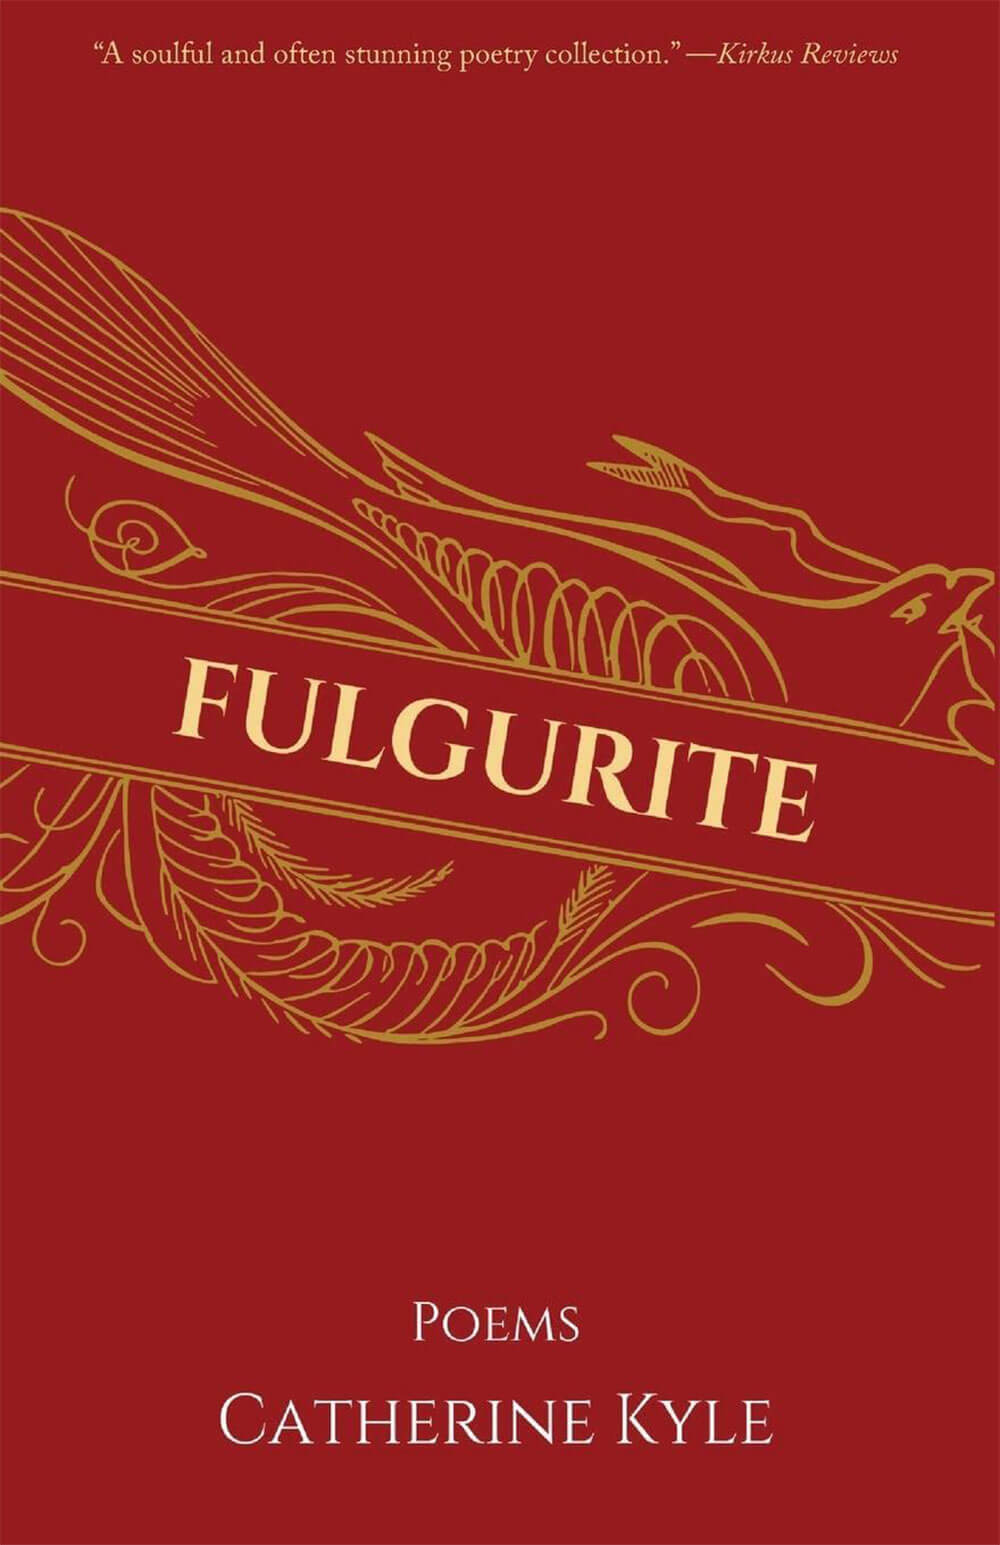 Book cover of Fulgurite by Catherine Broadwall